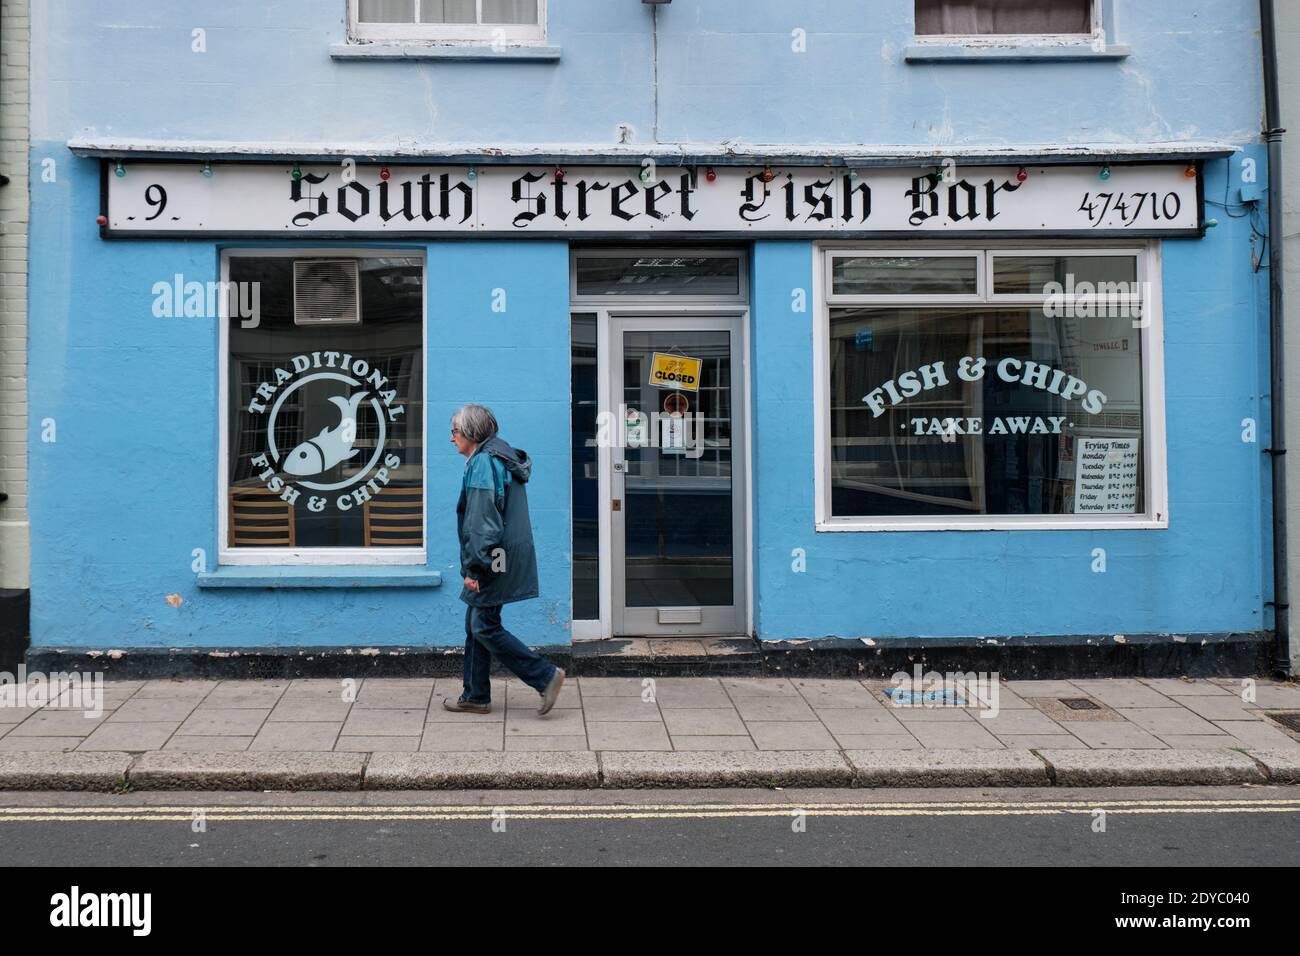 South Street Fish Bar, a blue fish a chips shop in Lewes, England, with pedestrian walking by in autumn Stock Photo